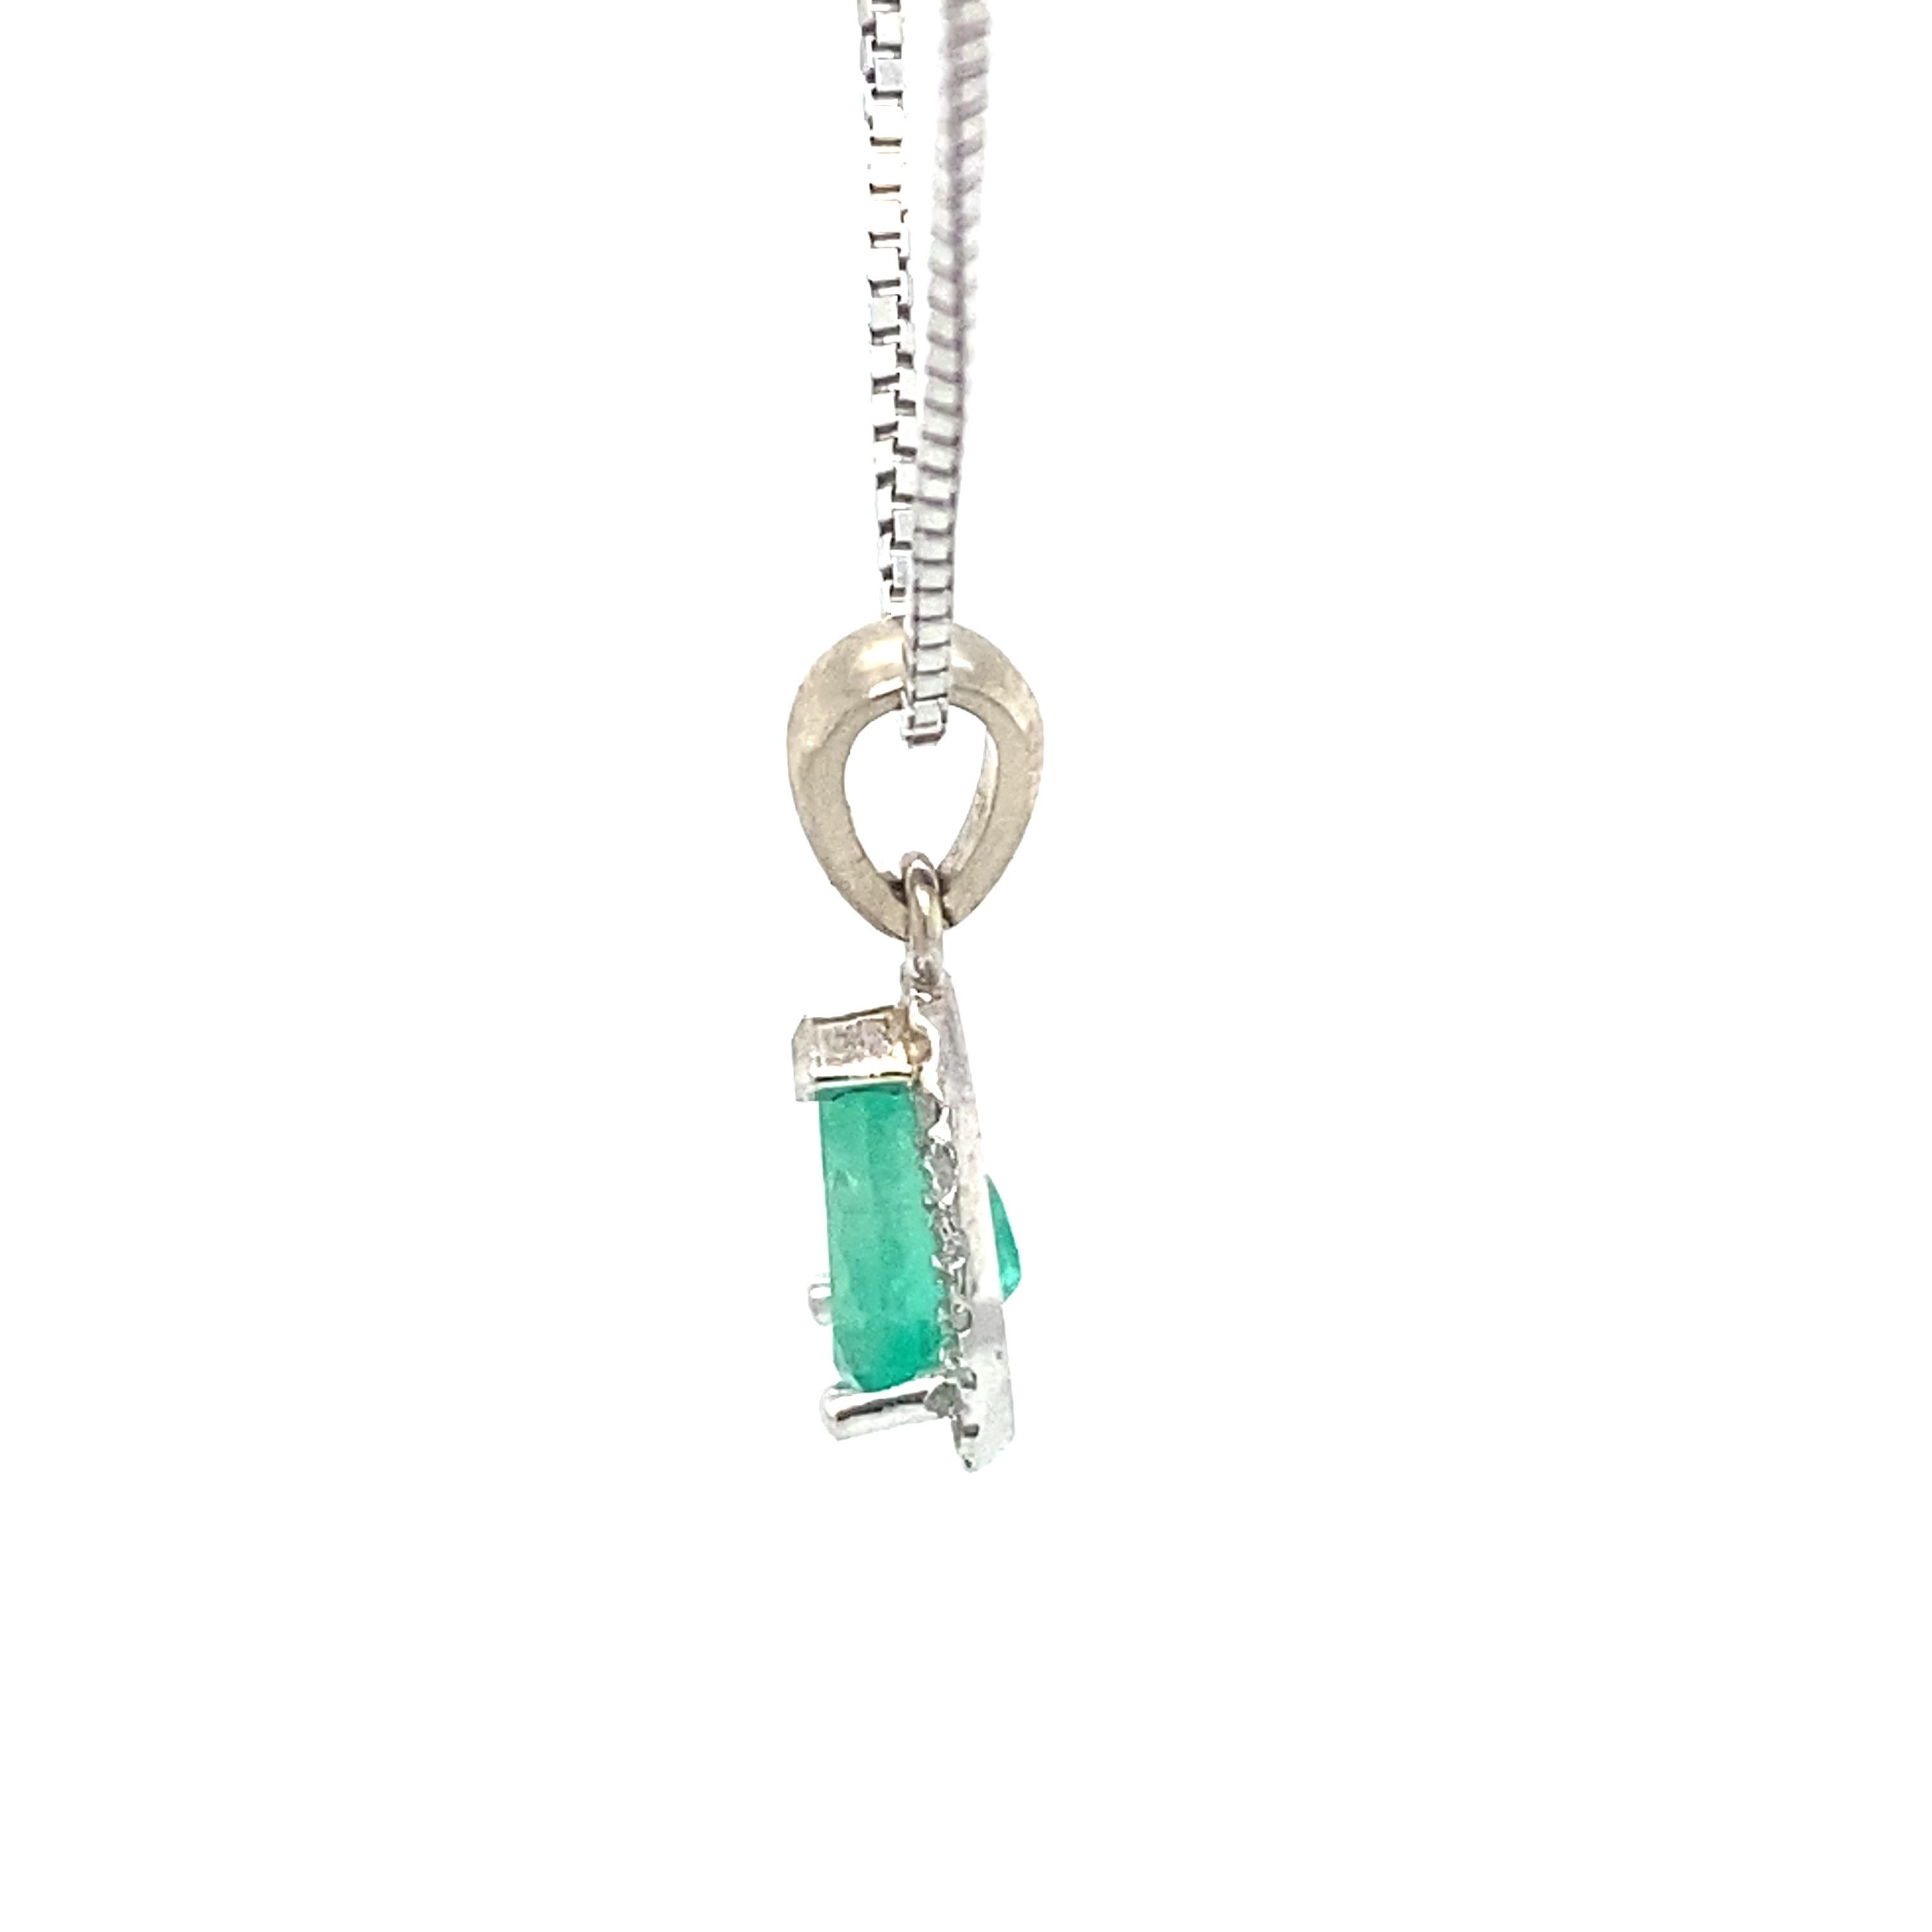 0.88 Carat Pear Cut Emerald and Diamond Pendant Necklace in 14 Karat White Gold For Sale 1